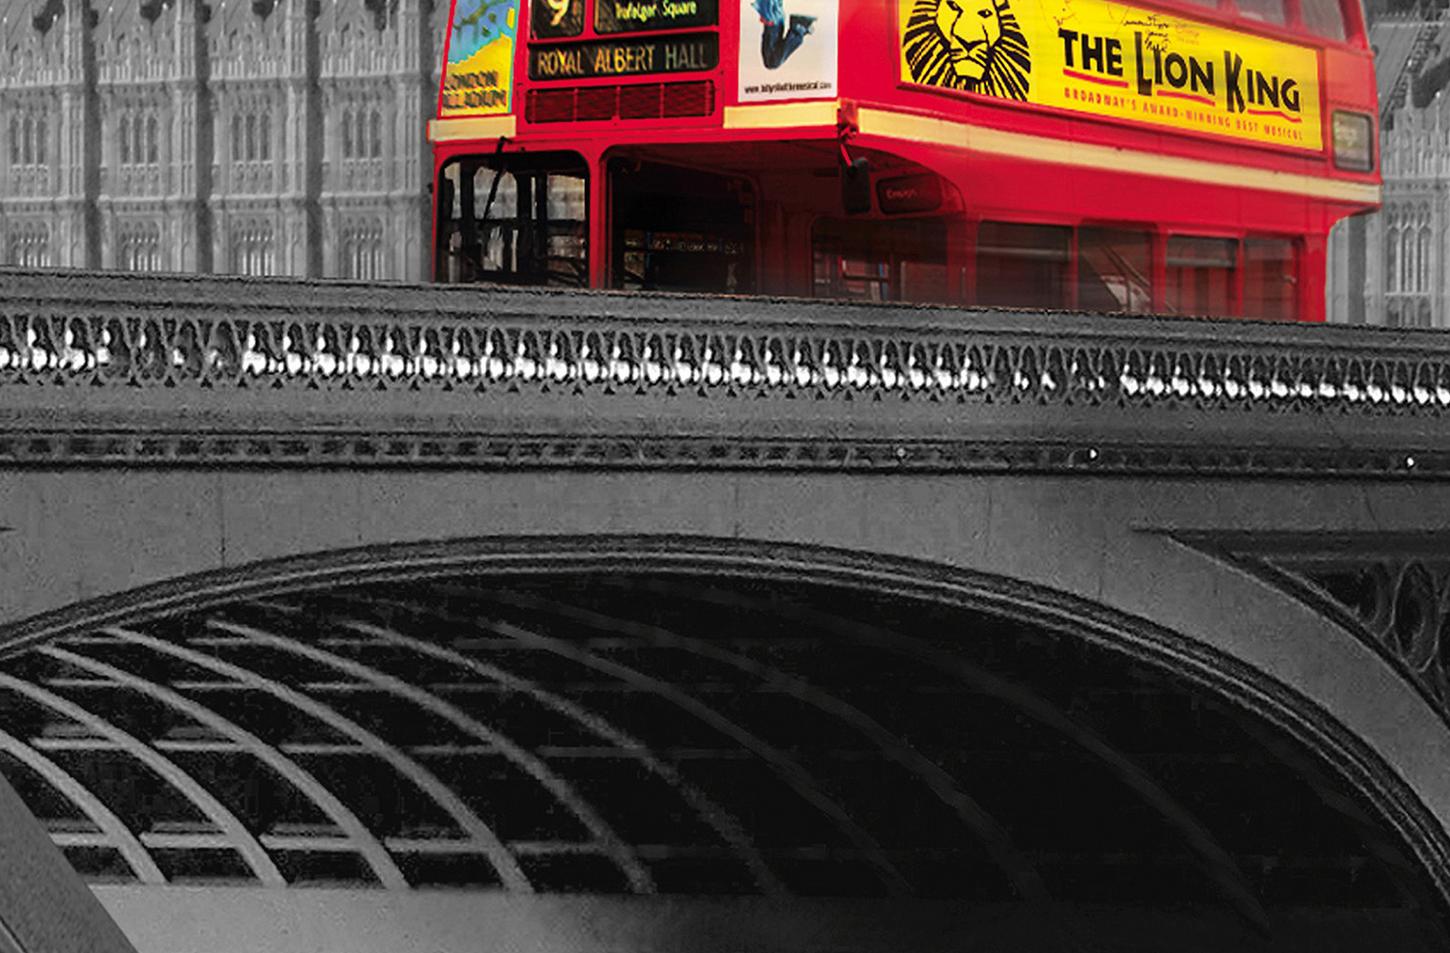 Fototapete RED BUS ON WESTMINSTER BRIDGE 175x115 London Big Ben Themse rot s-w